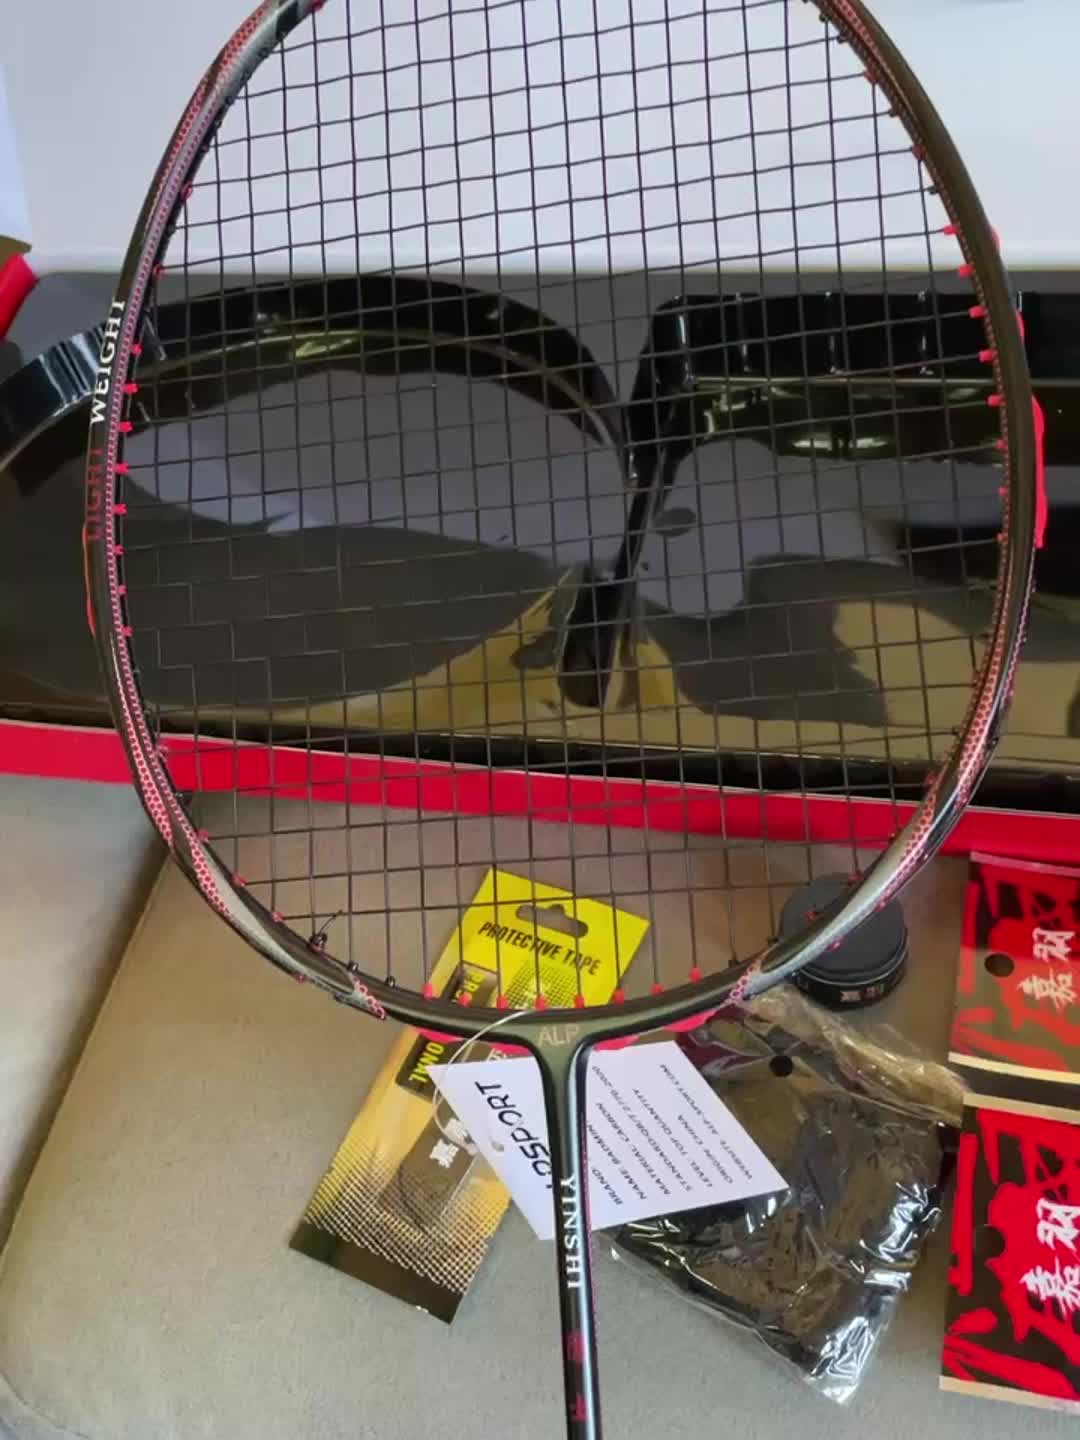 Alpsport Max 35 Lbs Serpentine Winding 4d Reality Badminton Racket - Free Installed String Titanium Net - Up To 35 Lbs Strung!